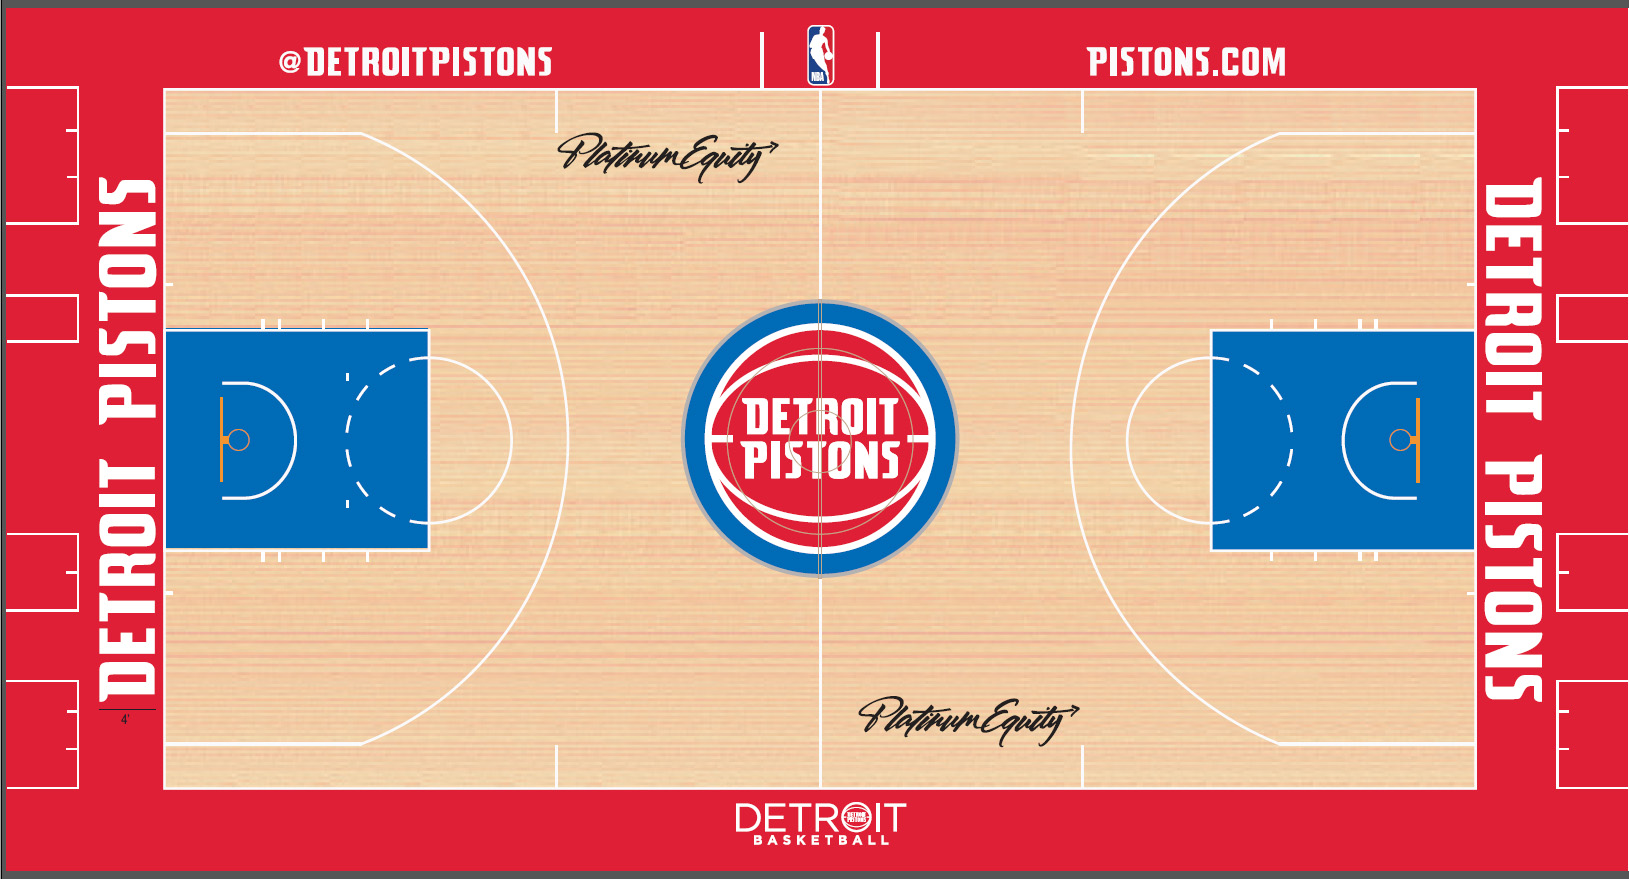 Pistons New Floor At Little Caesars Arena To Feature Platinum Equity On